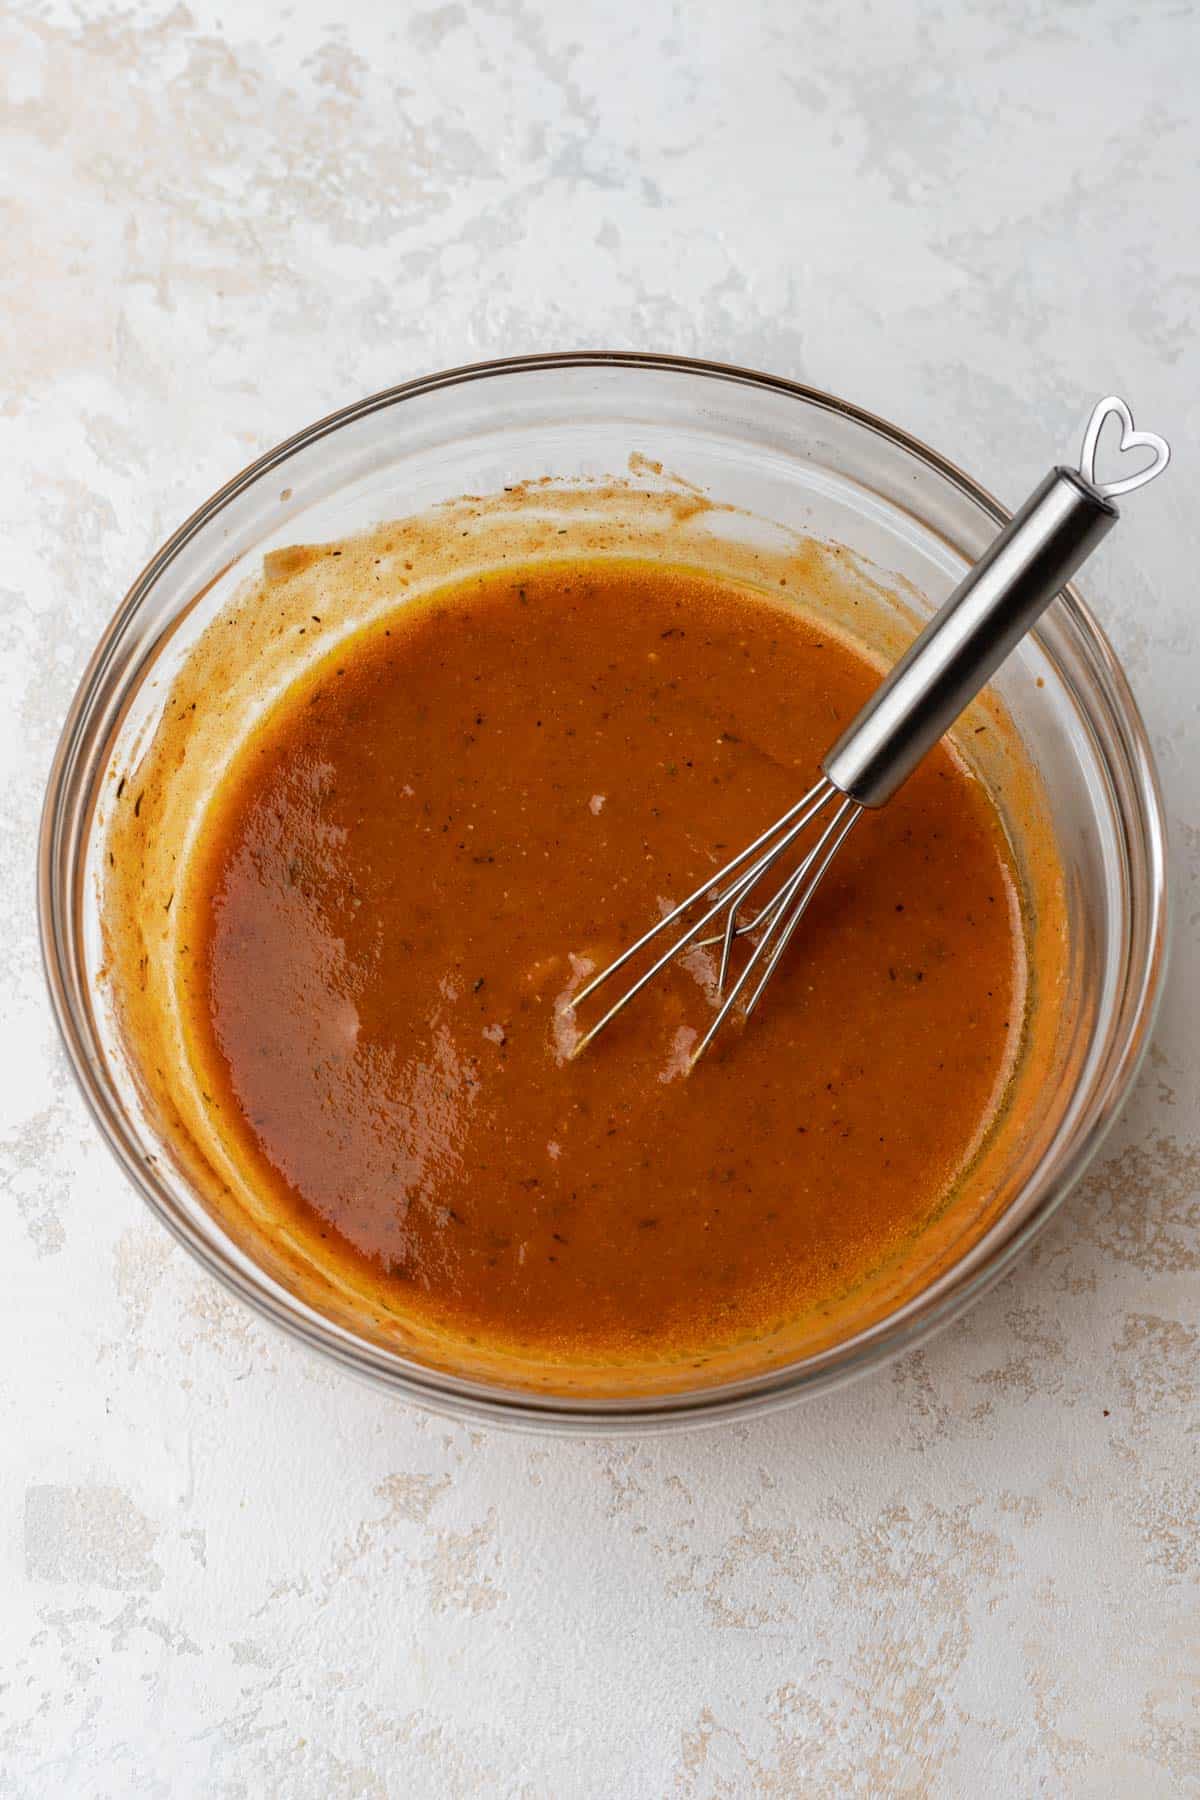 Pumpkin vinaigrette whisked together in a glass mixing bowl.